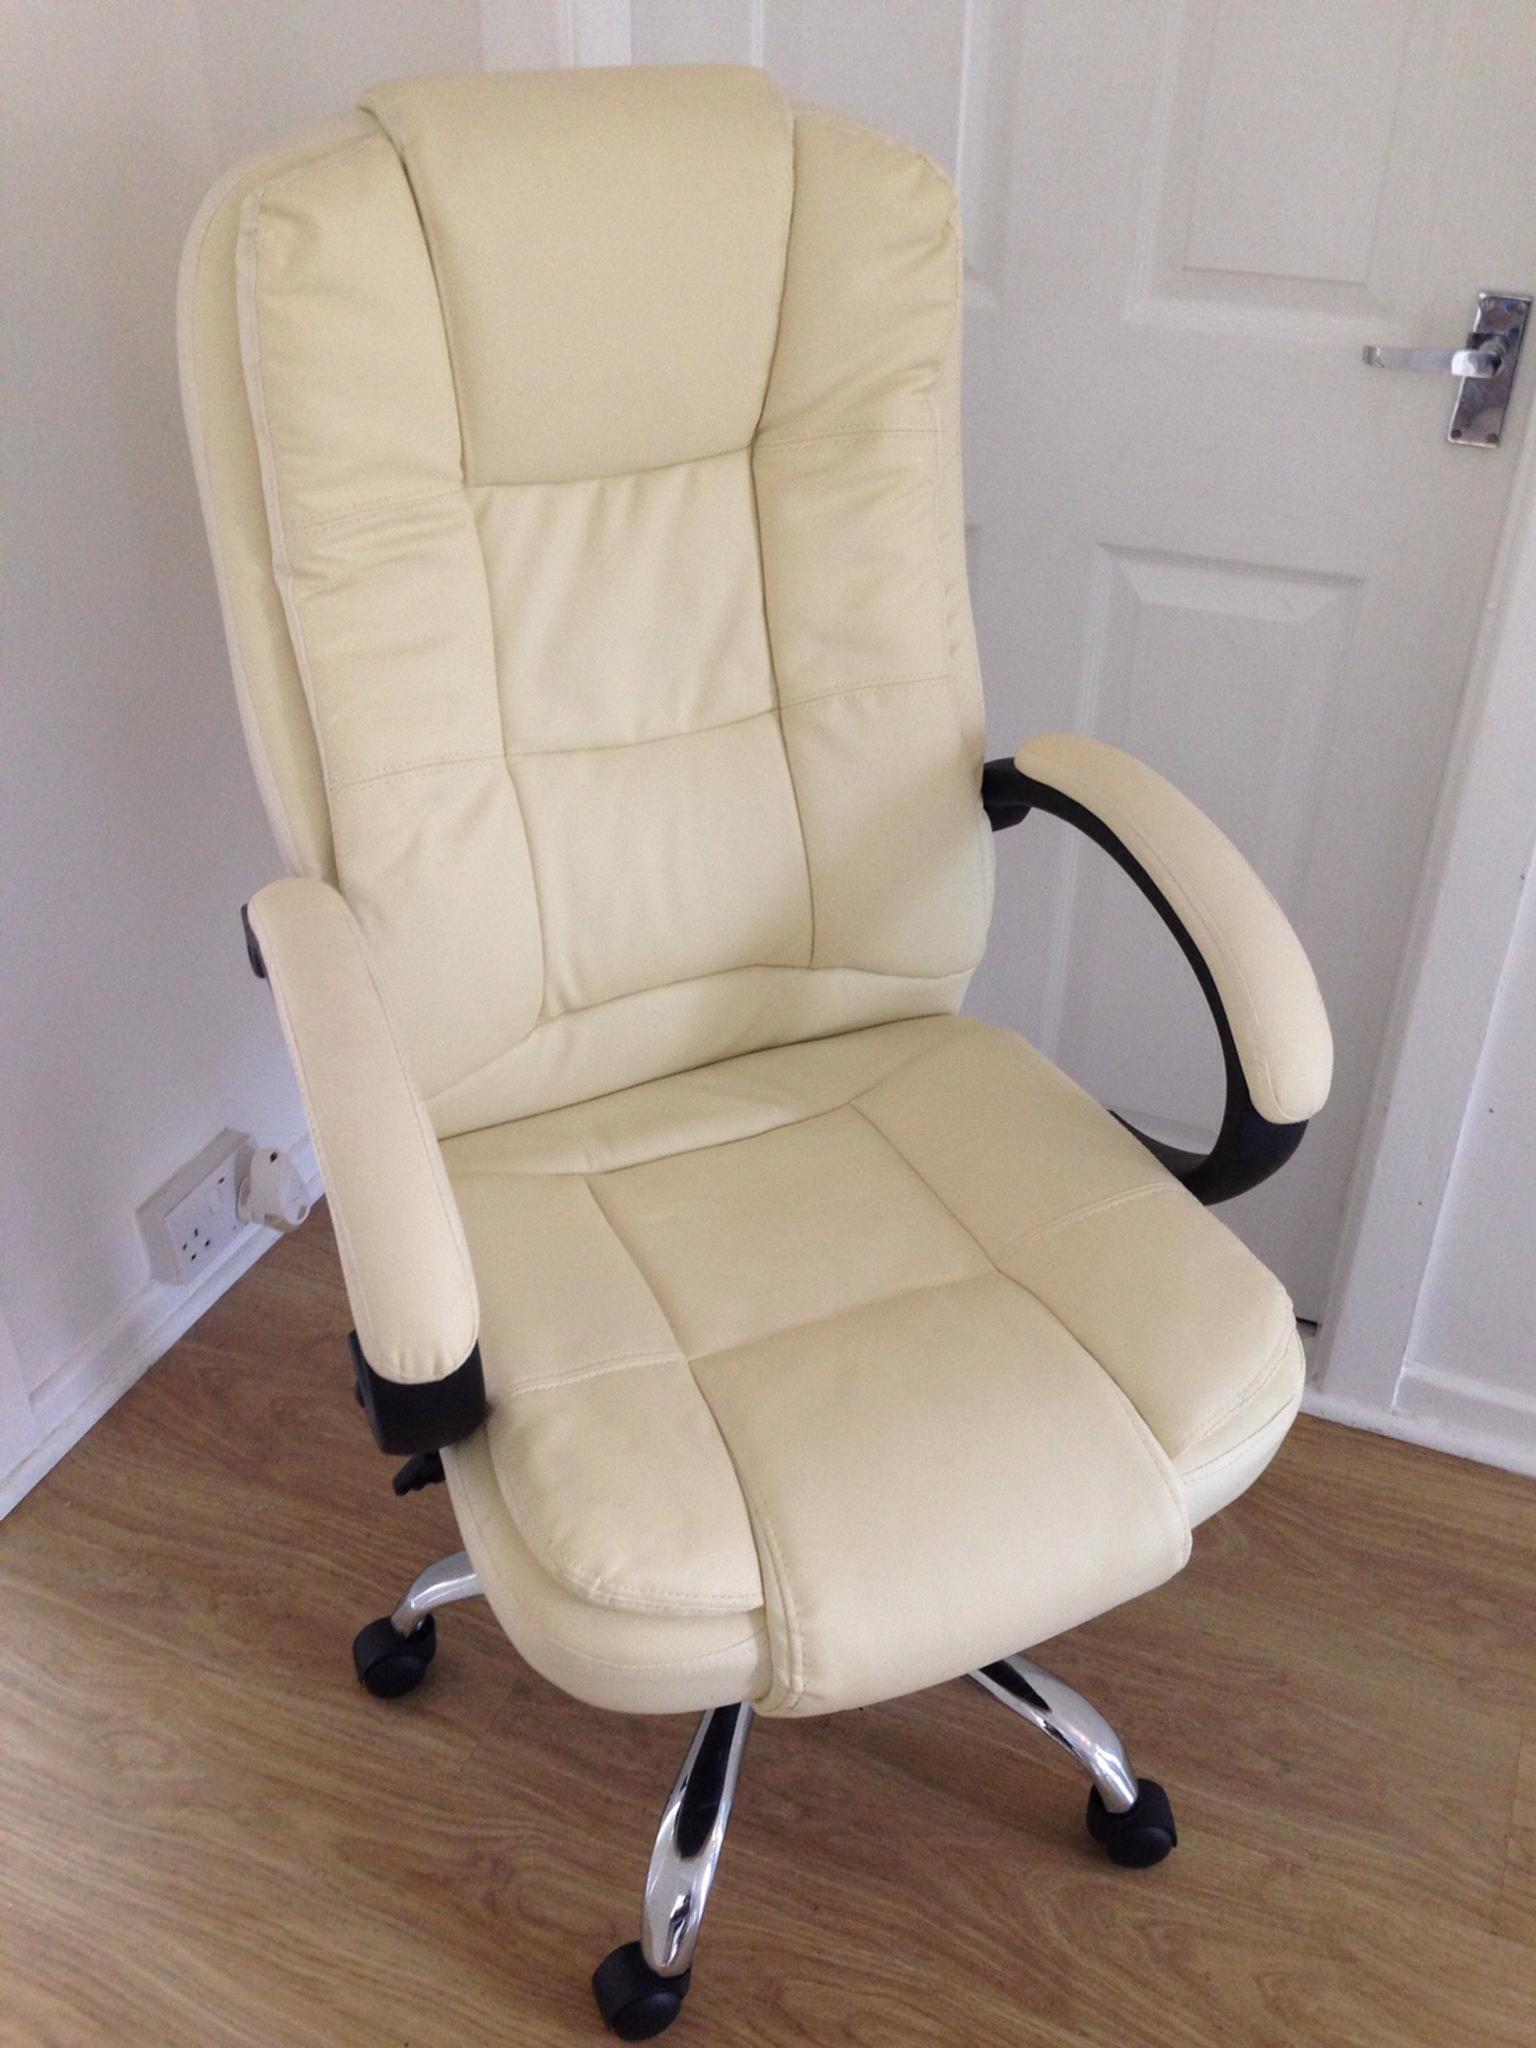 Cream Faux Leather Office Chair In L25, Cream Office Chair Faux Leather